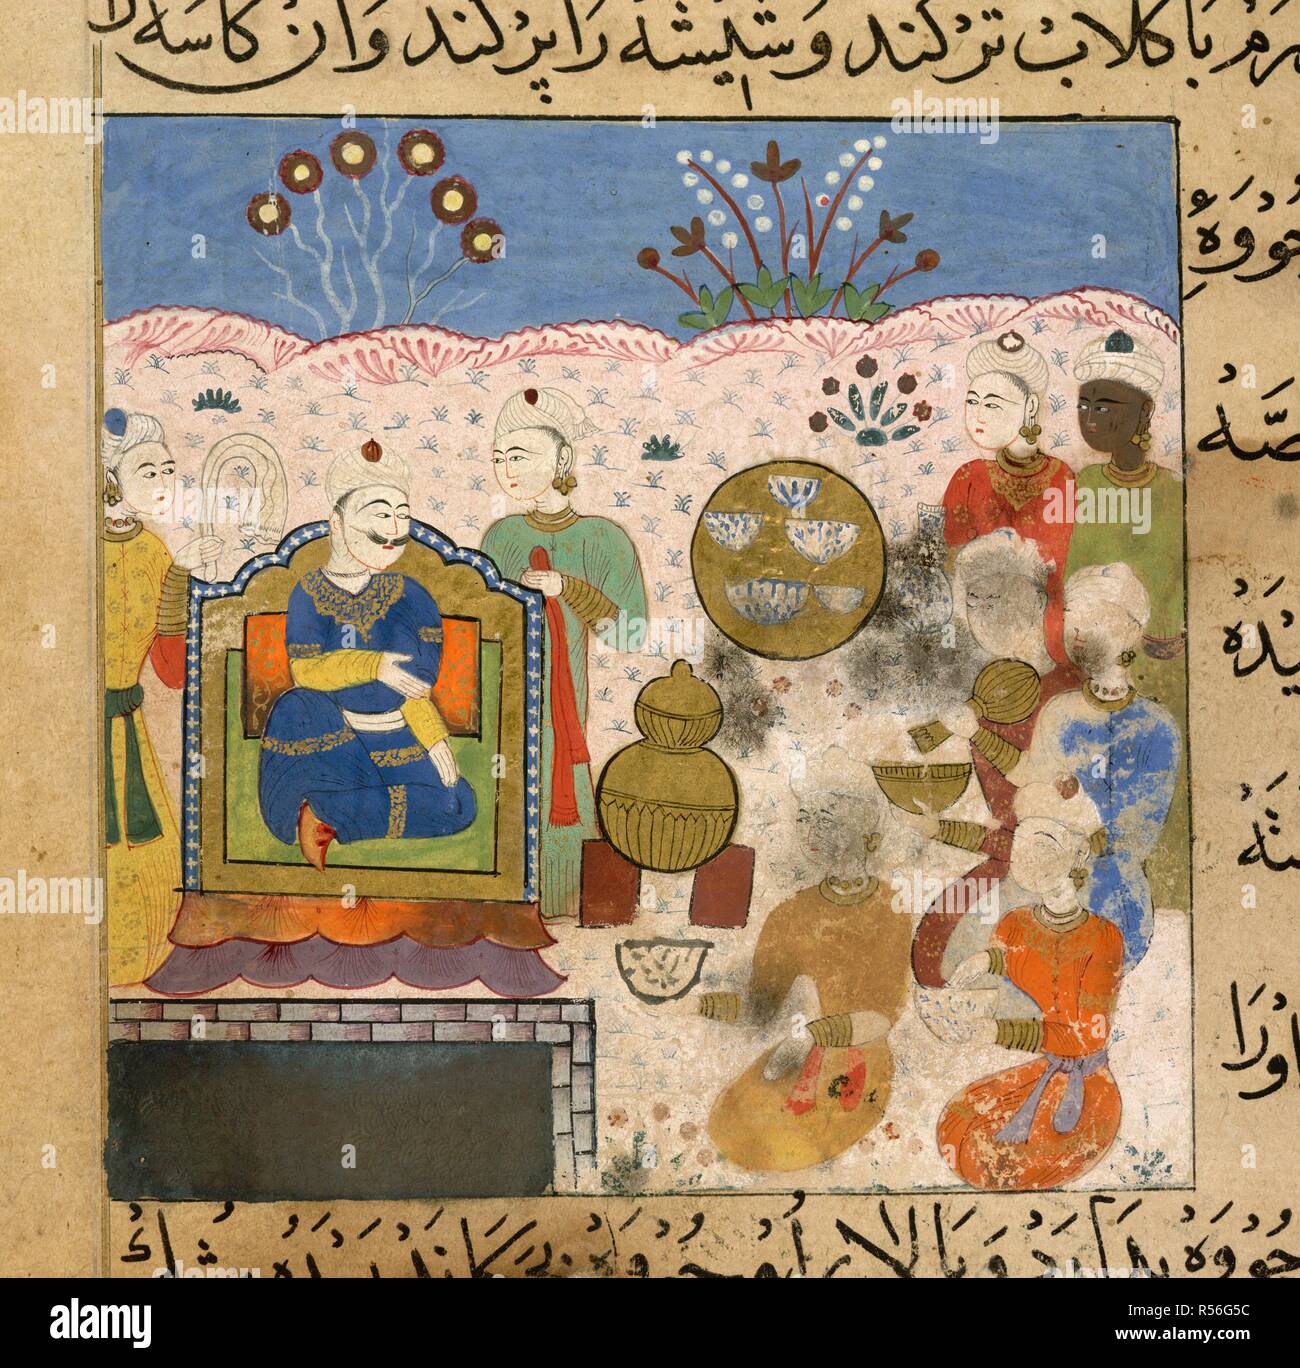 Preparation of perfume. The Ni'matnama-i Nasir al-Din Shah. A manuscript o. 1495 - 1505. Preparation of perfume and aromatic paste for the Sultan Ghiyath al-Din. Opaque watercolour. Sultanate style.  Image taken from The Ni'matnama-i Nasir al-Din Shah. A manuscript on Indian cookery and the preparation of sweetmeats, spices etc.  Originally published/produced in 1495 - 1505. . Source: I.O. ISLAMIC 149, f.165v. Language: Persian. Stock Photo